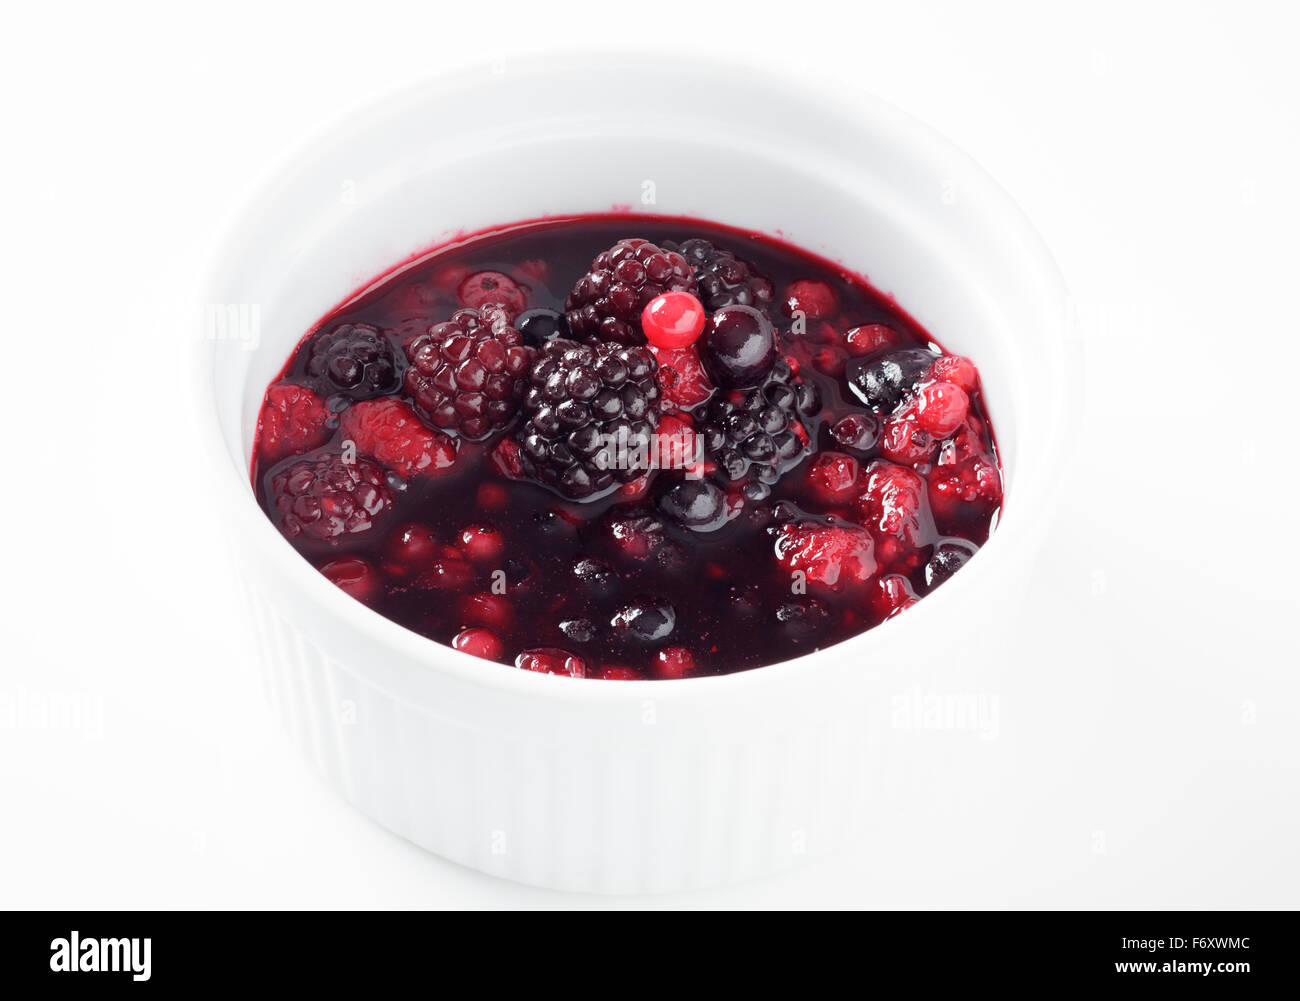 Mixed berry compote Stock Photo